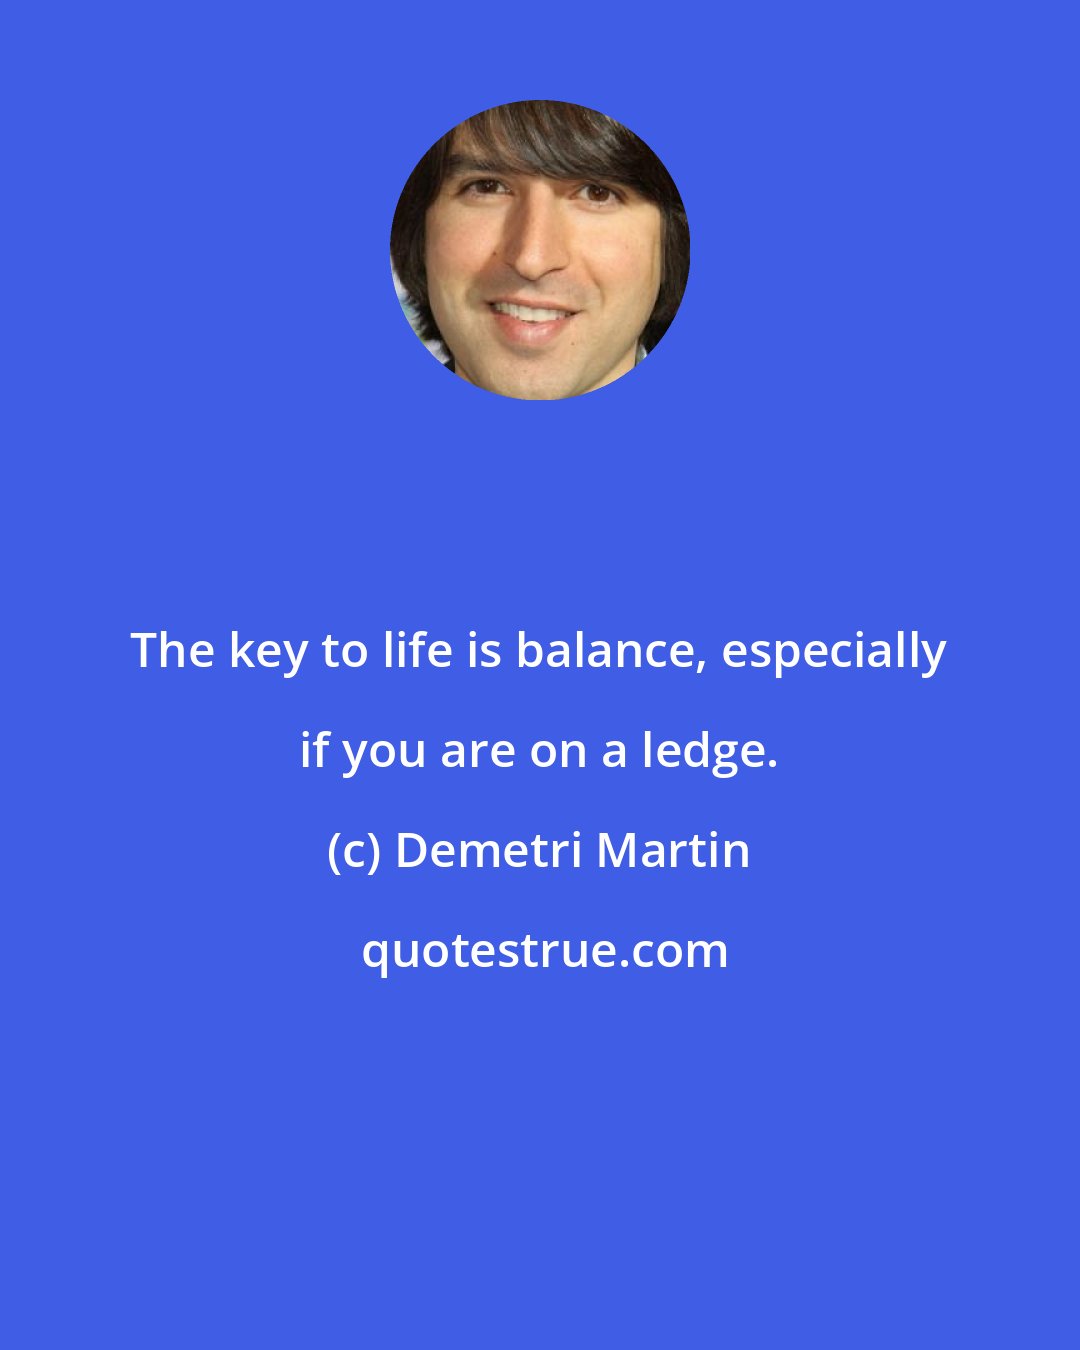 Demetri Martin: The key to life is balance, especially if you are on a ledge.